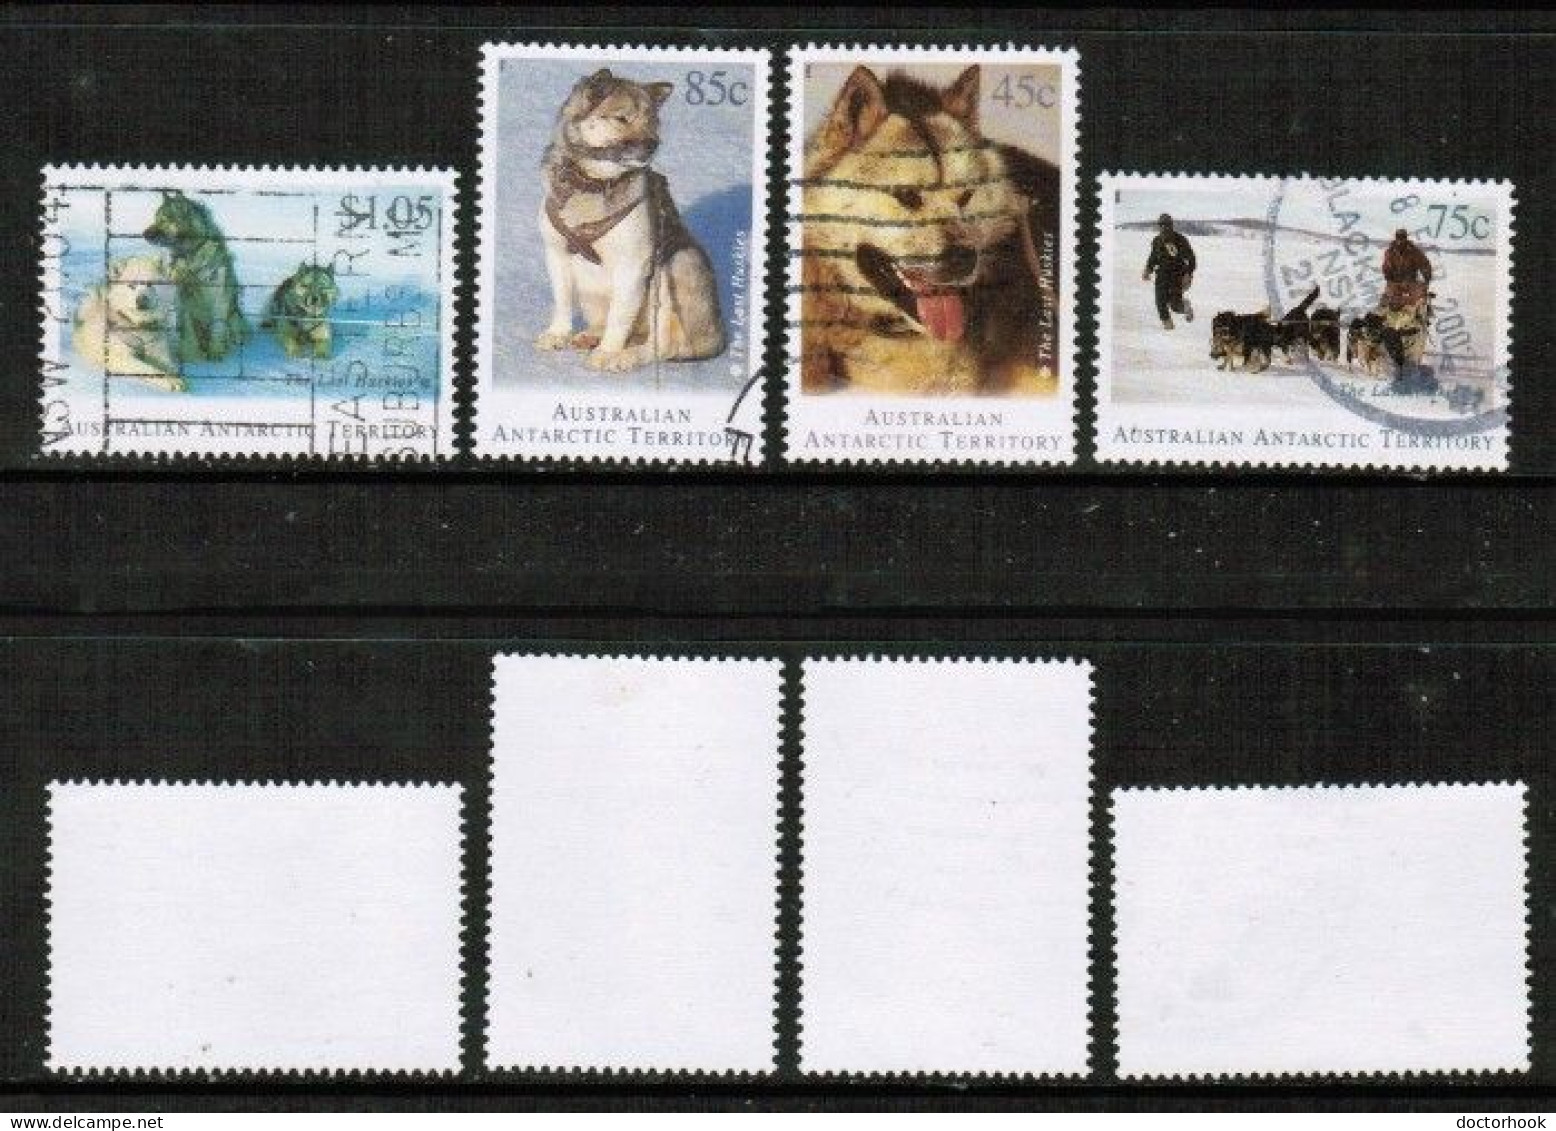 AUSTRALIAN ANTARCTIC TERRITORY   Scott # L 90-3 USED (CONDITION AS PER SCAN) (Stamp Scan # 928-11) - Used Stamps